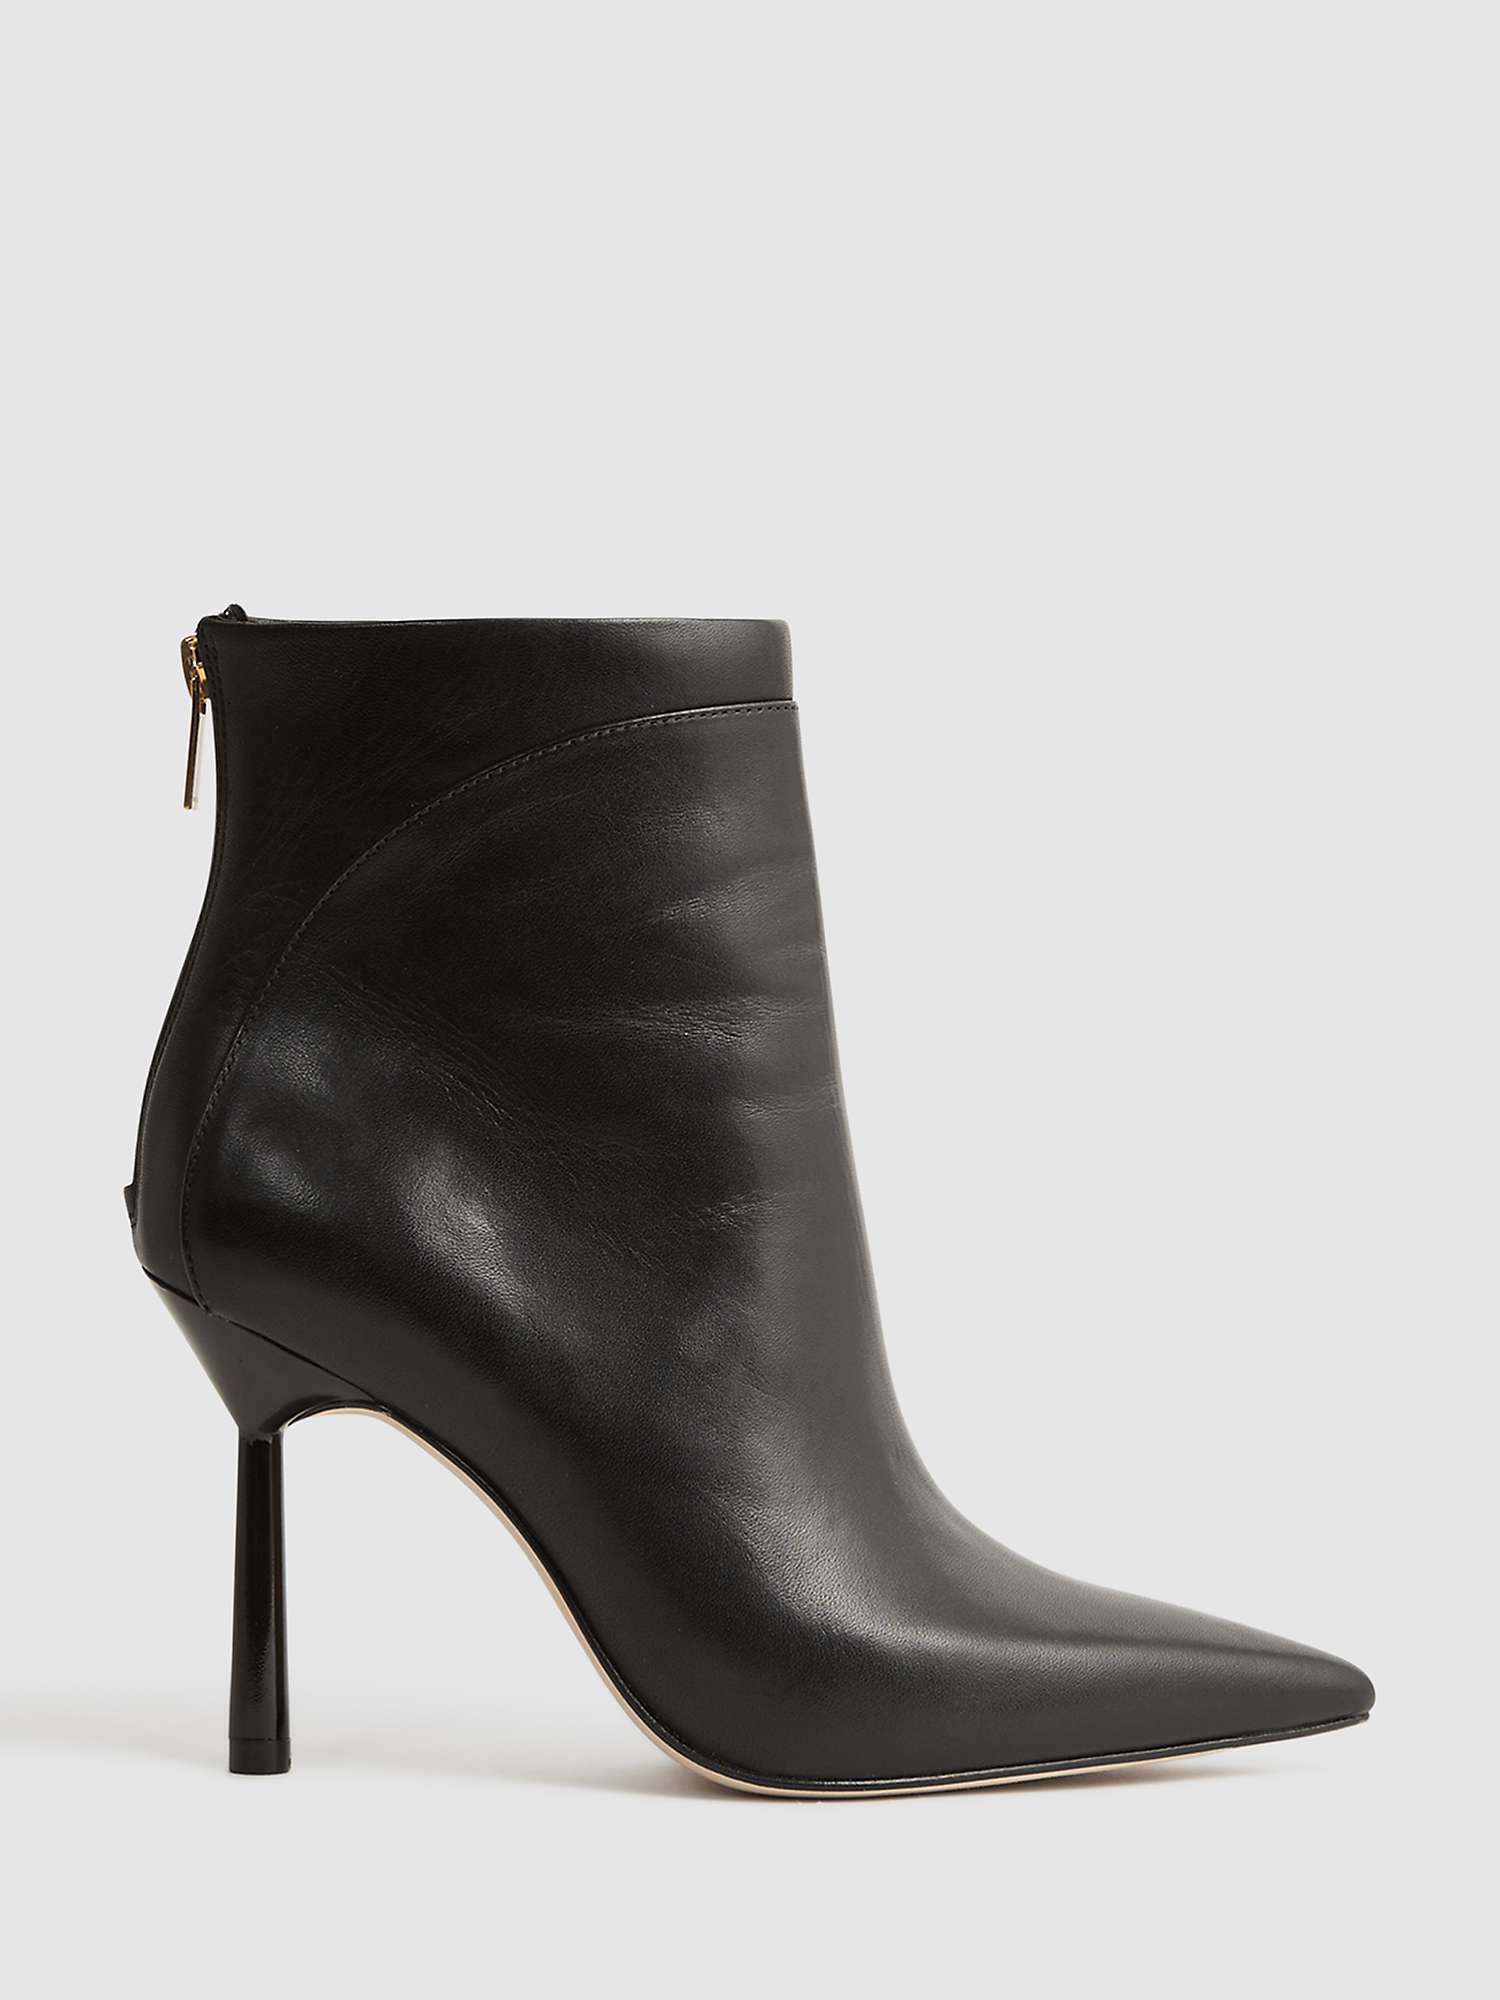 Buy Reiss Lyra Signature Leather Stiletto Ankle Boots Online at johnlewis.com